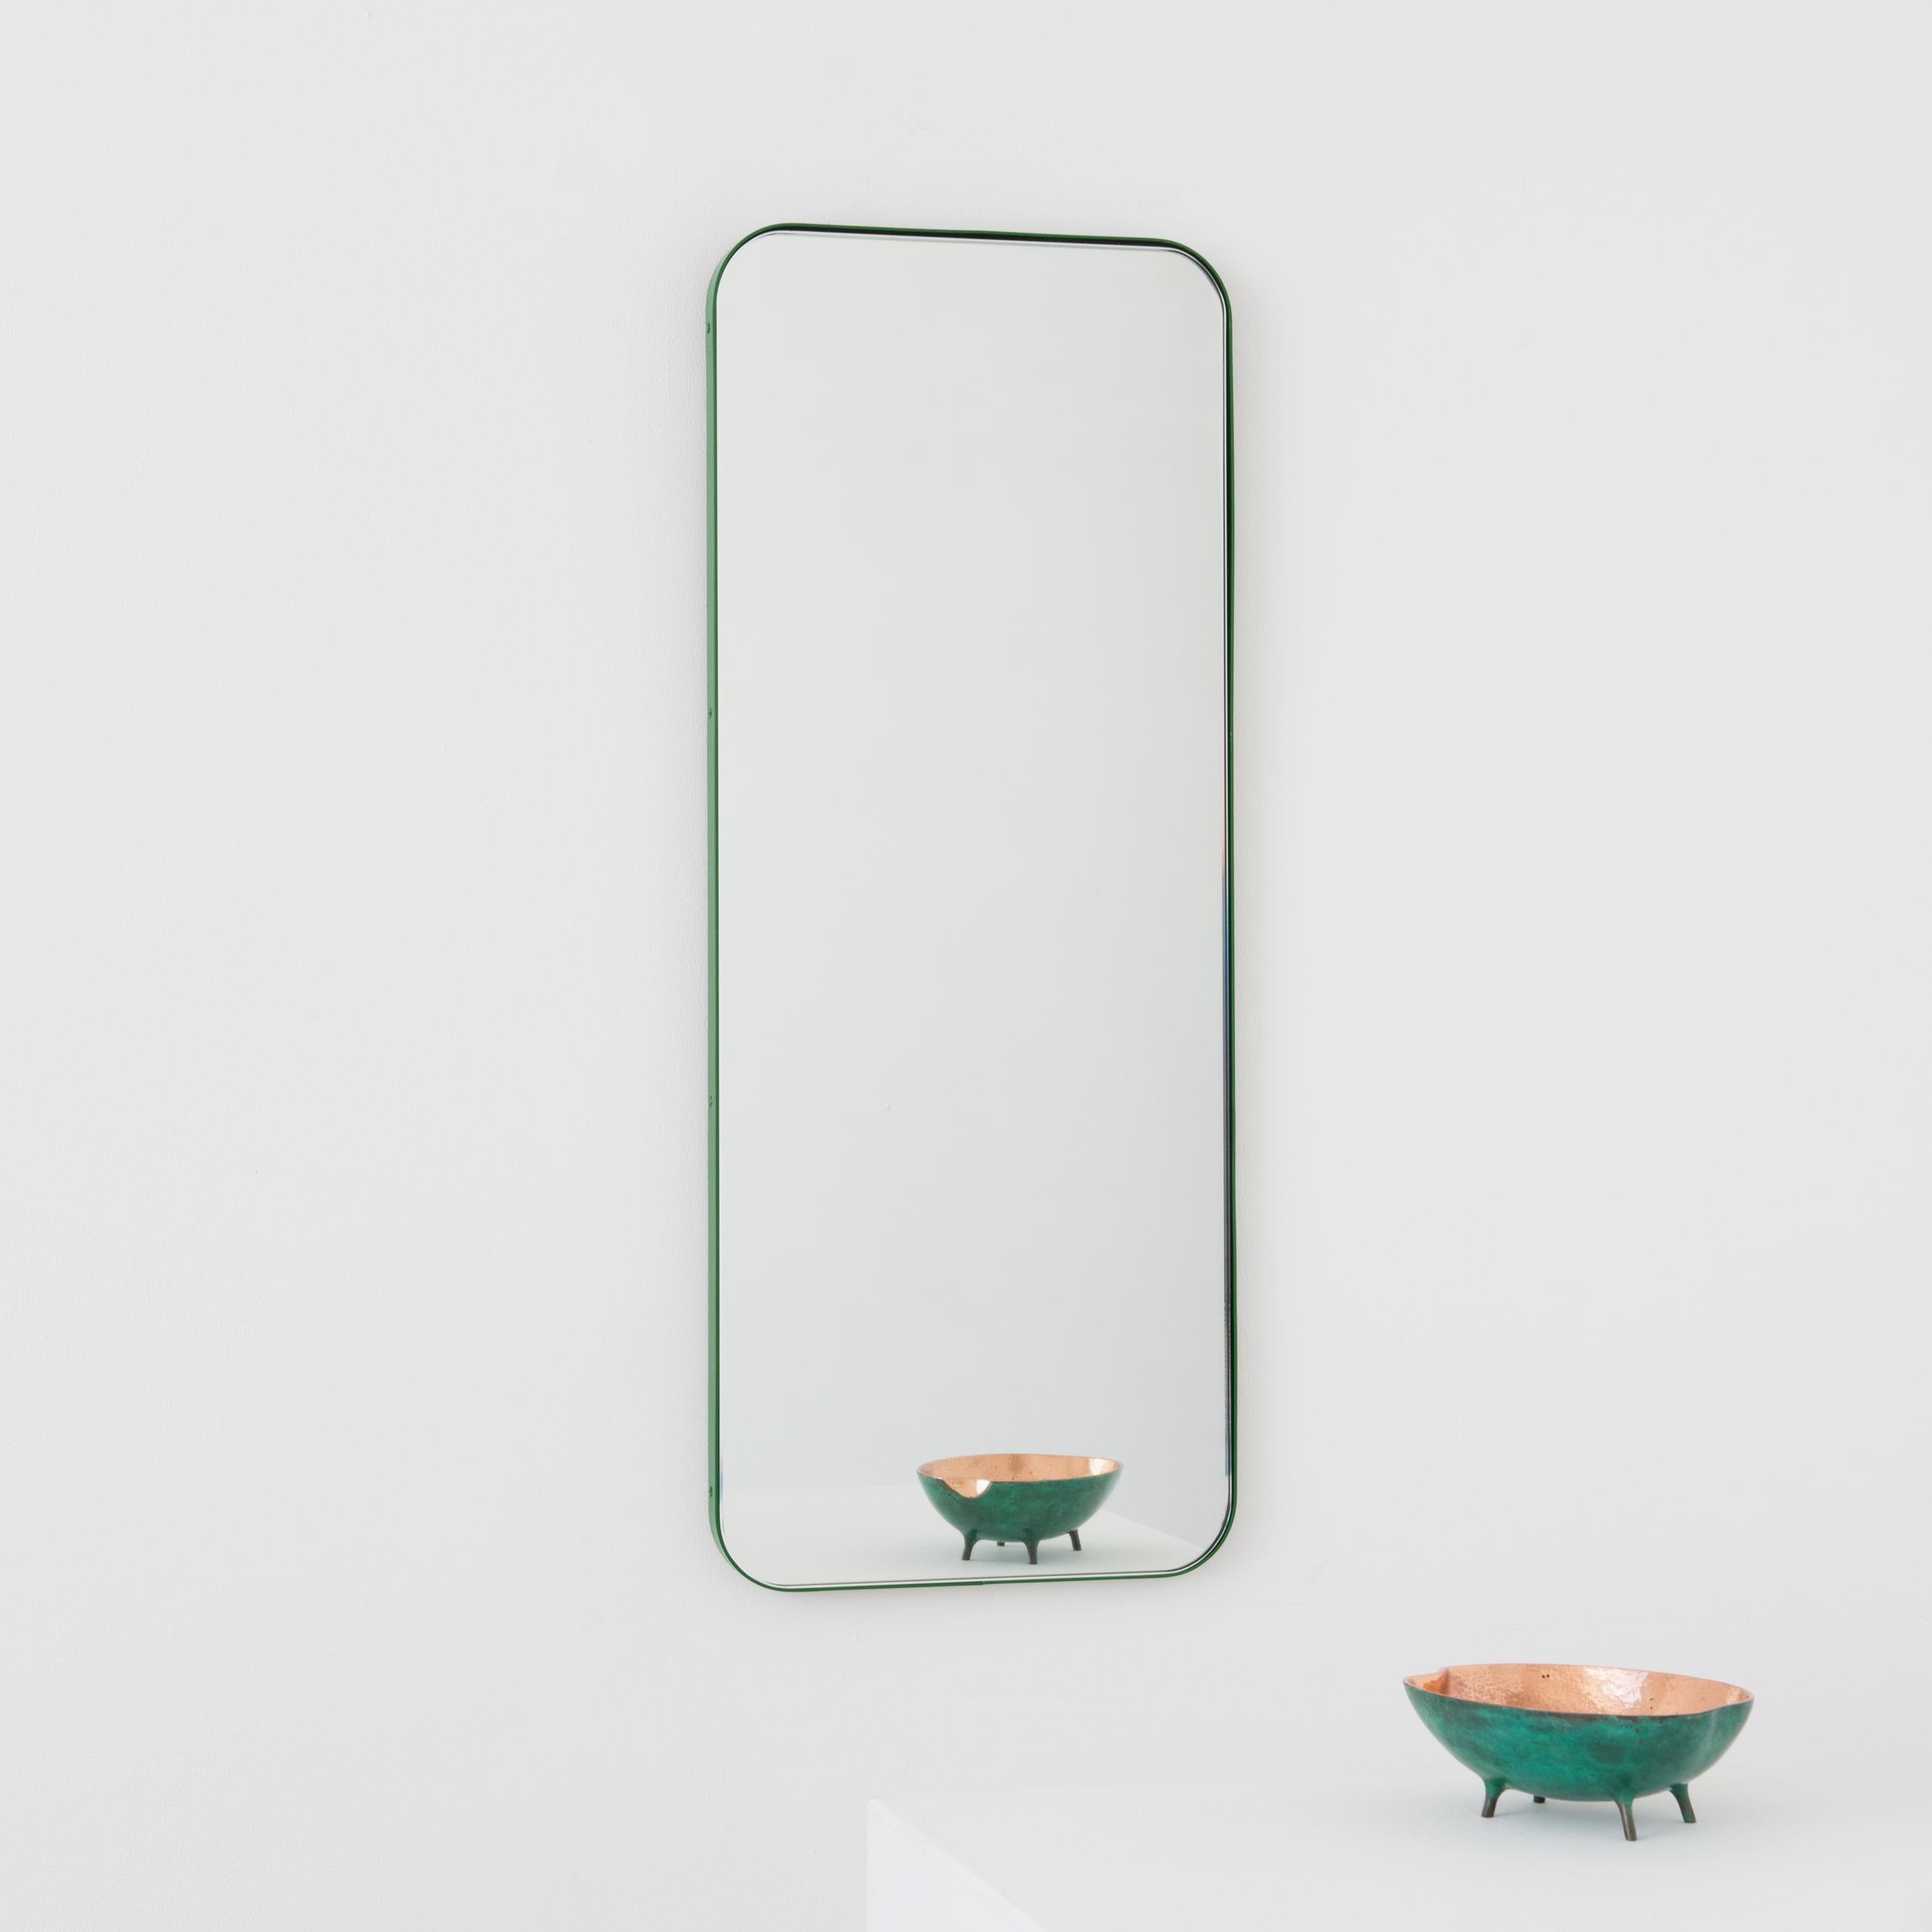 Quadris Rectangular Modern Mirror with a Green Frame, Large In New Condition For Sale In London, GB